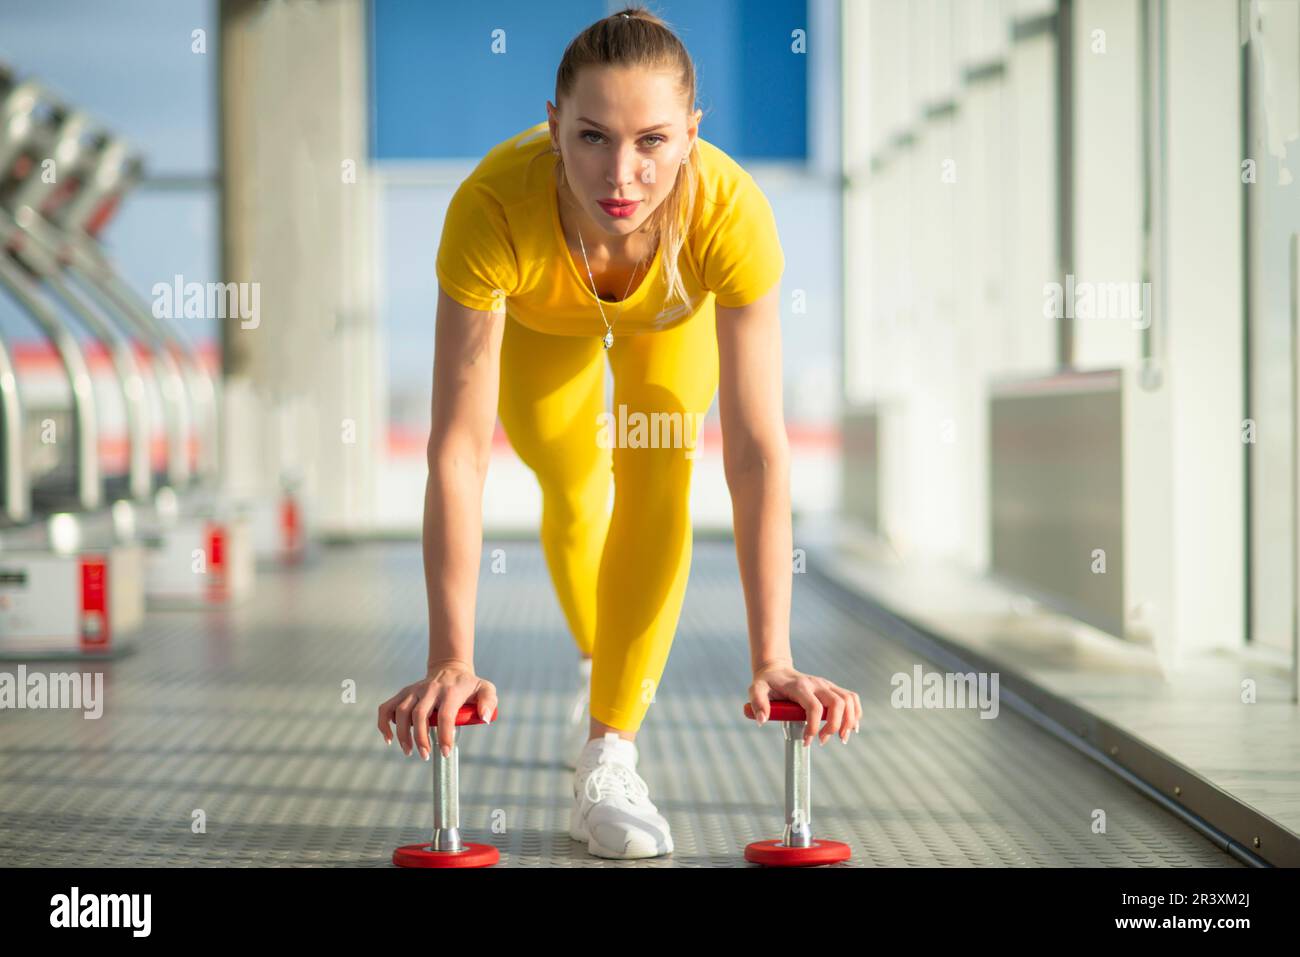 Physically fit woman at the gym with dumbbells ready to strengthen her arms and biceps Stock Photo